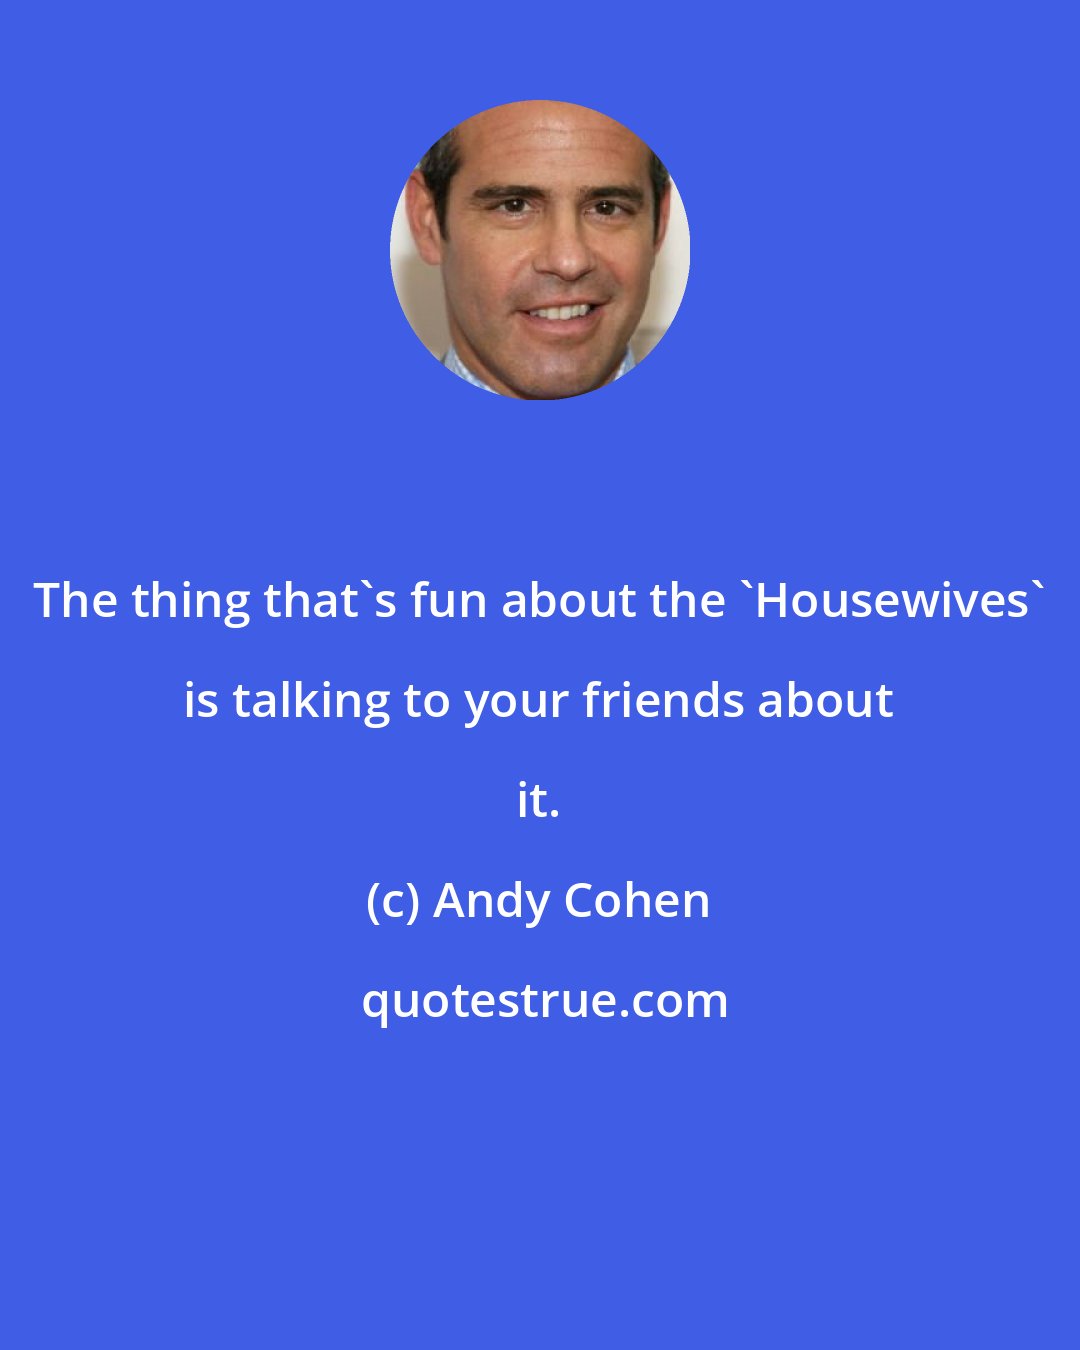 Andy Cohen: The thing that's fun about the 'Housewives' is talking to your friends about it.